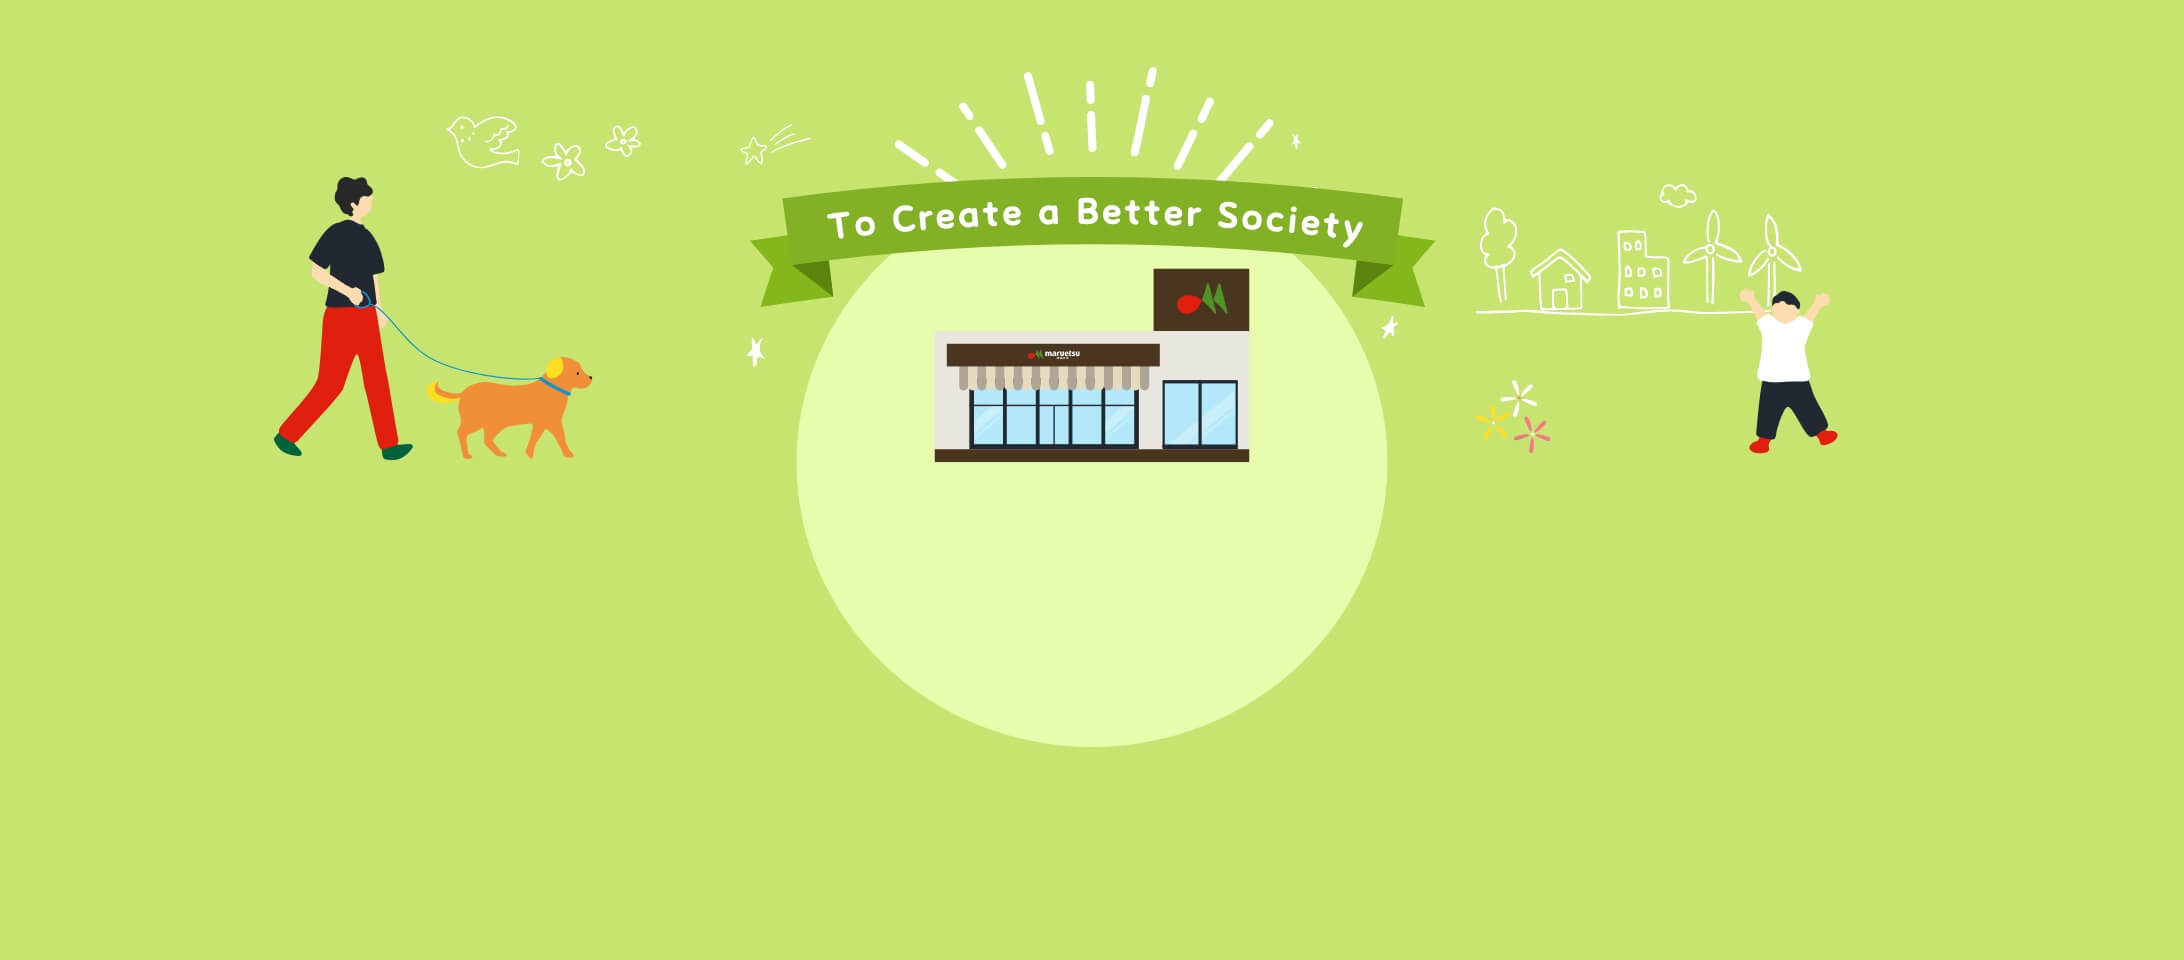 To Create a Better Society